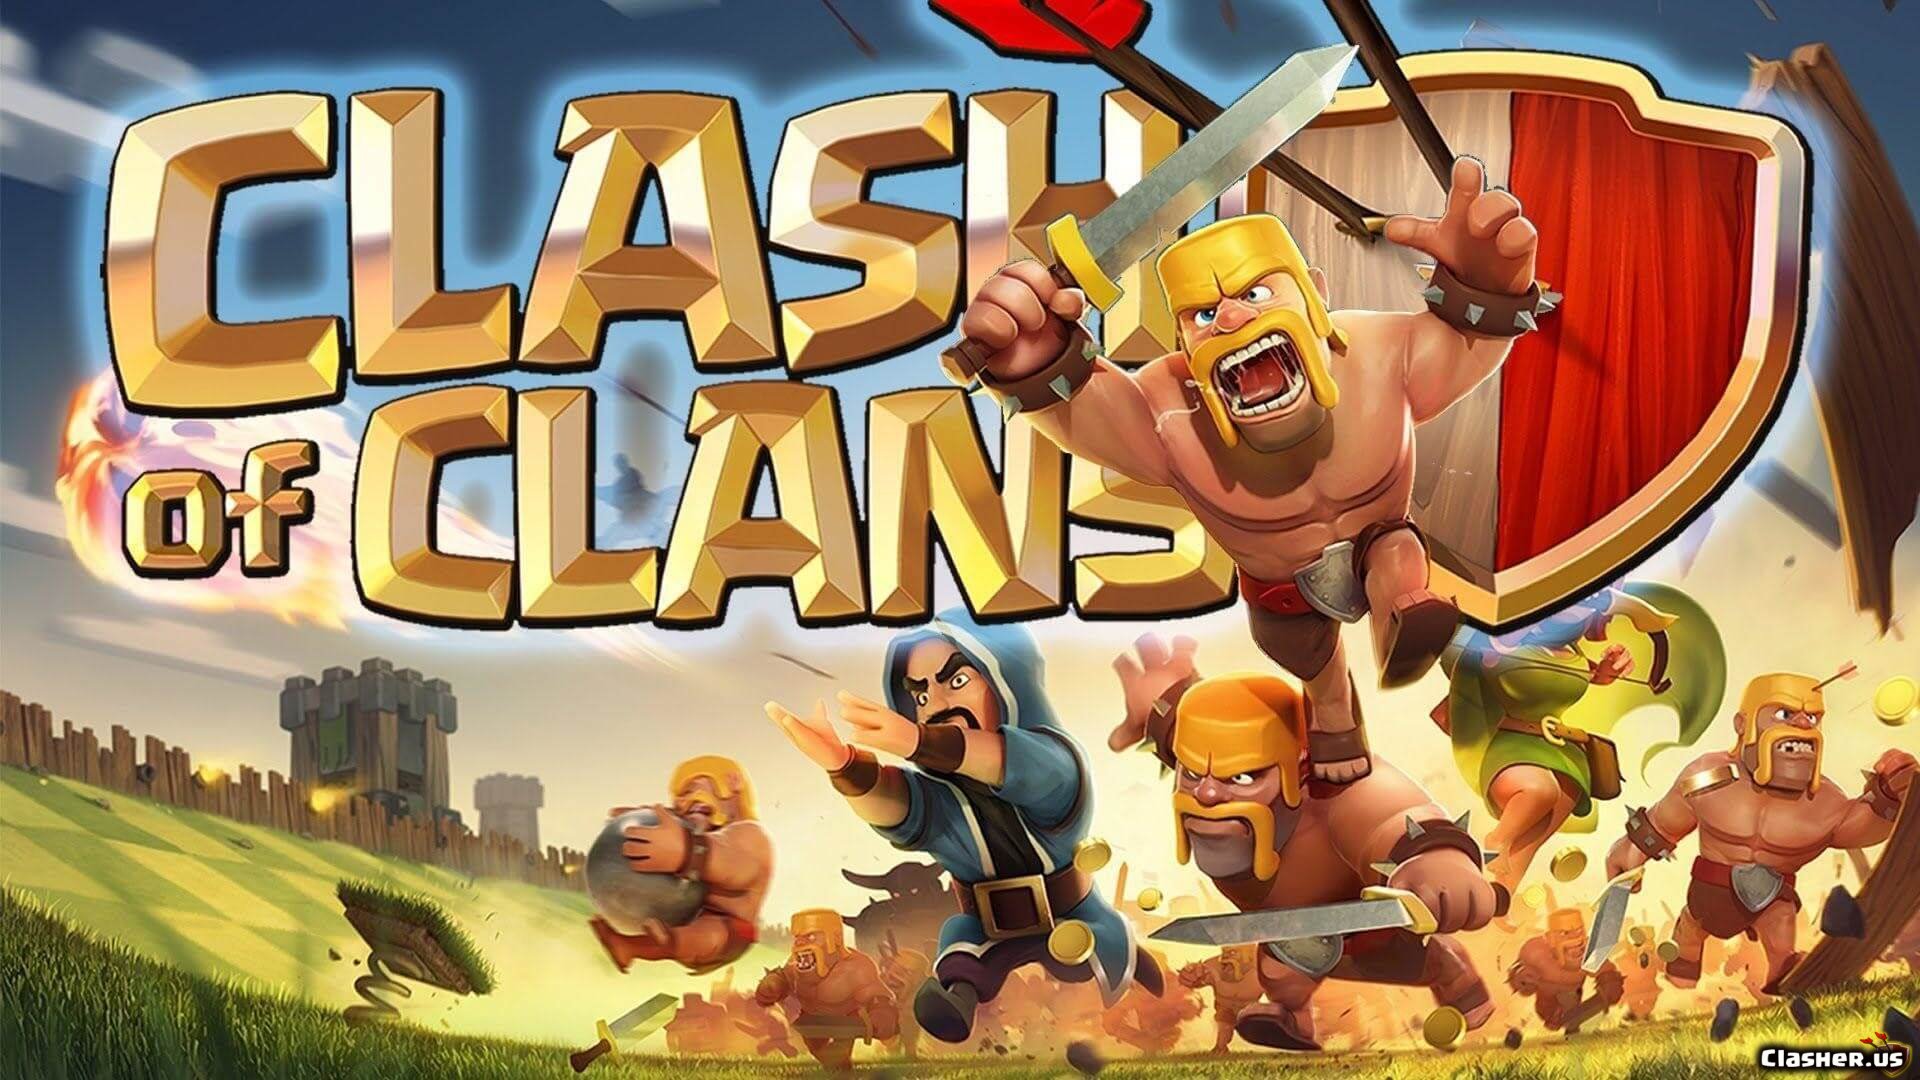 clash of clans logo wallpaper background 72 2560x1440 px on clash of clans logo wallpapers